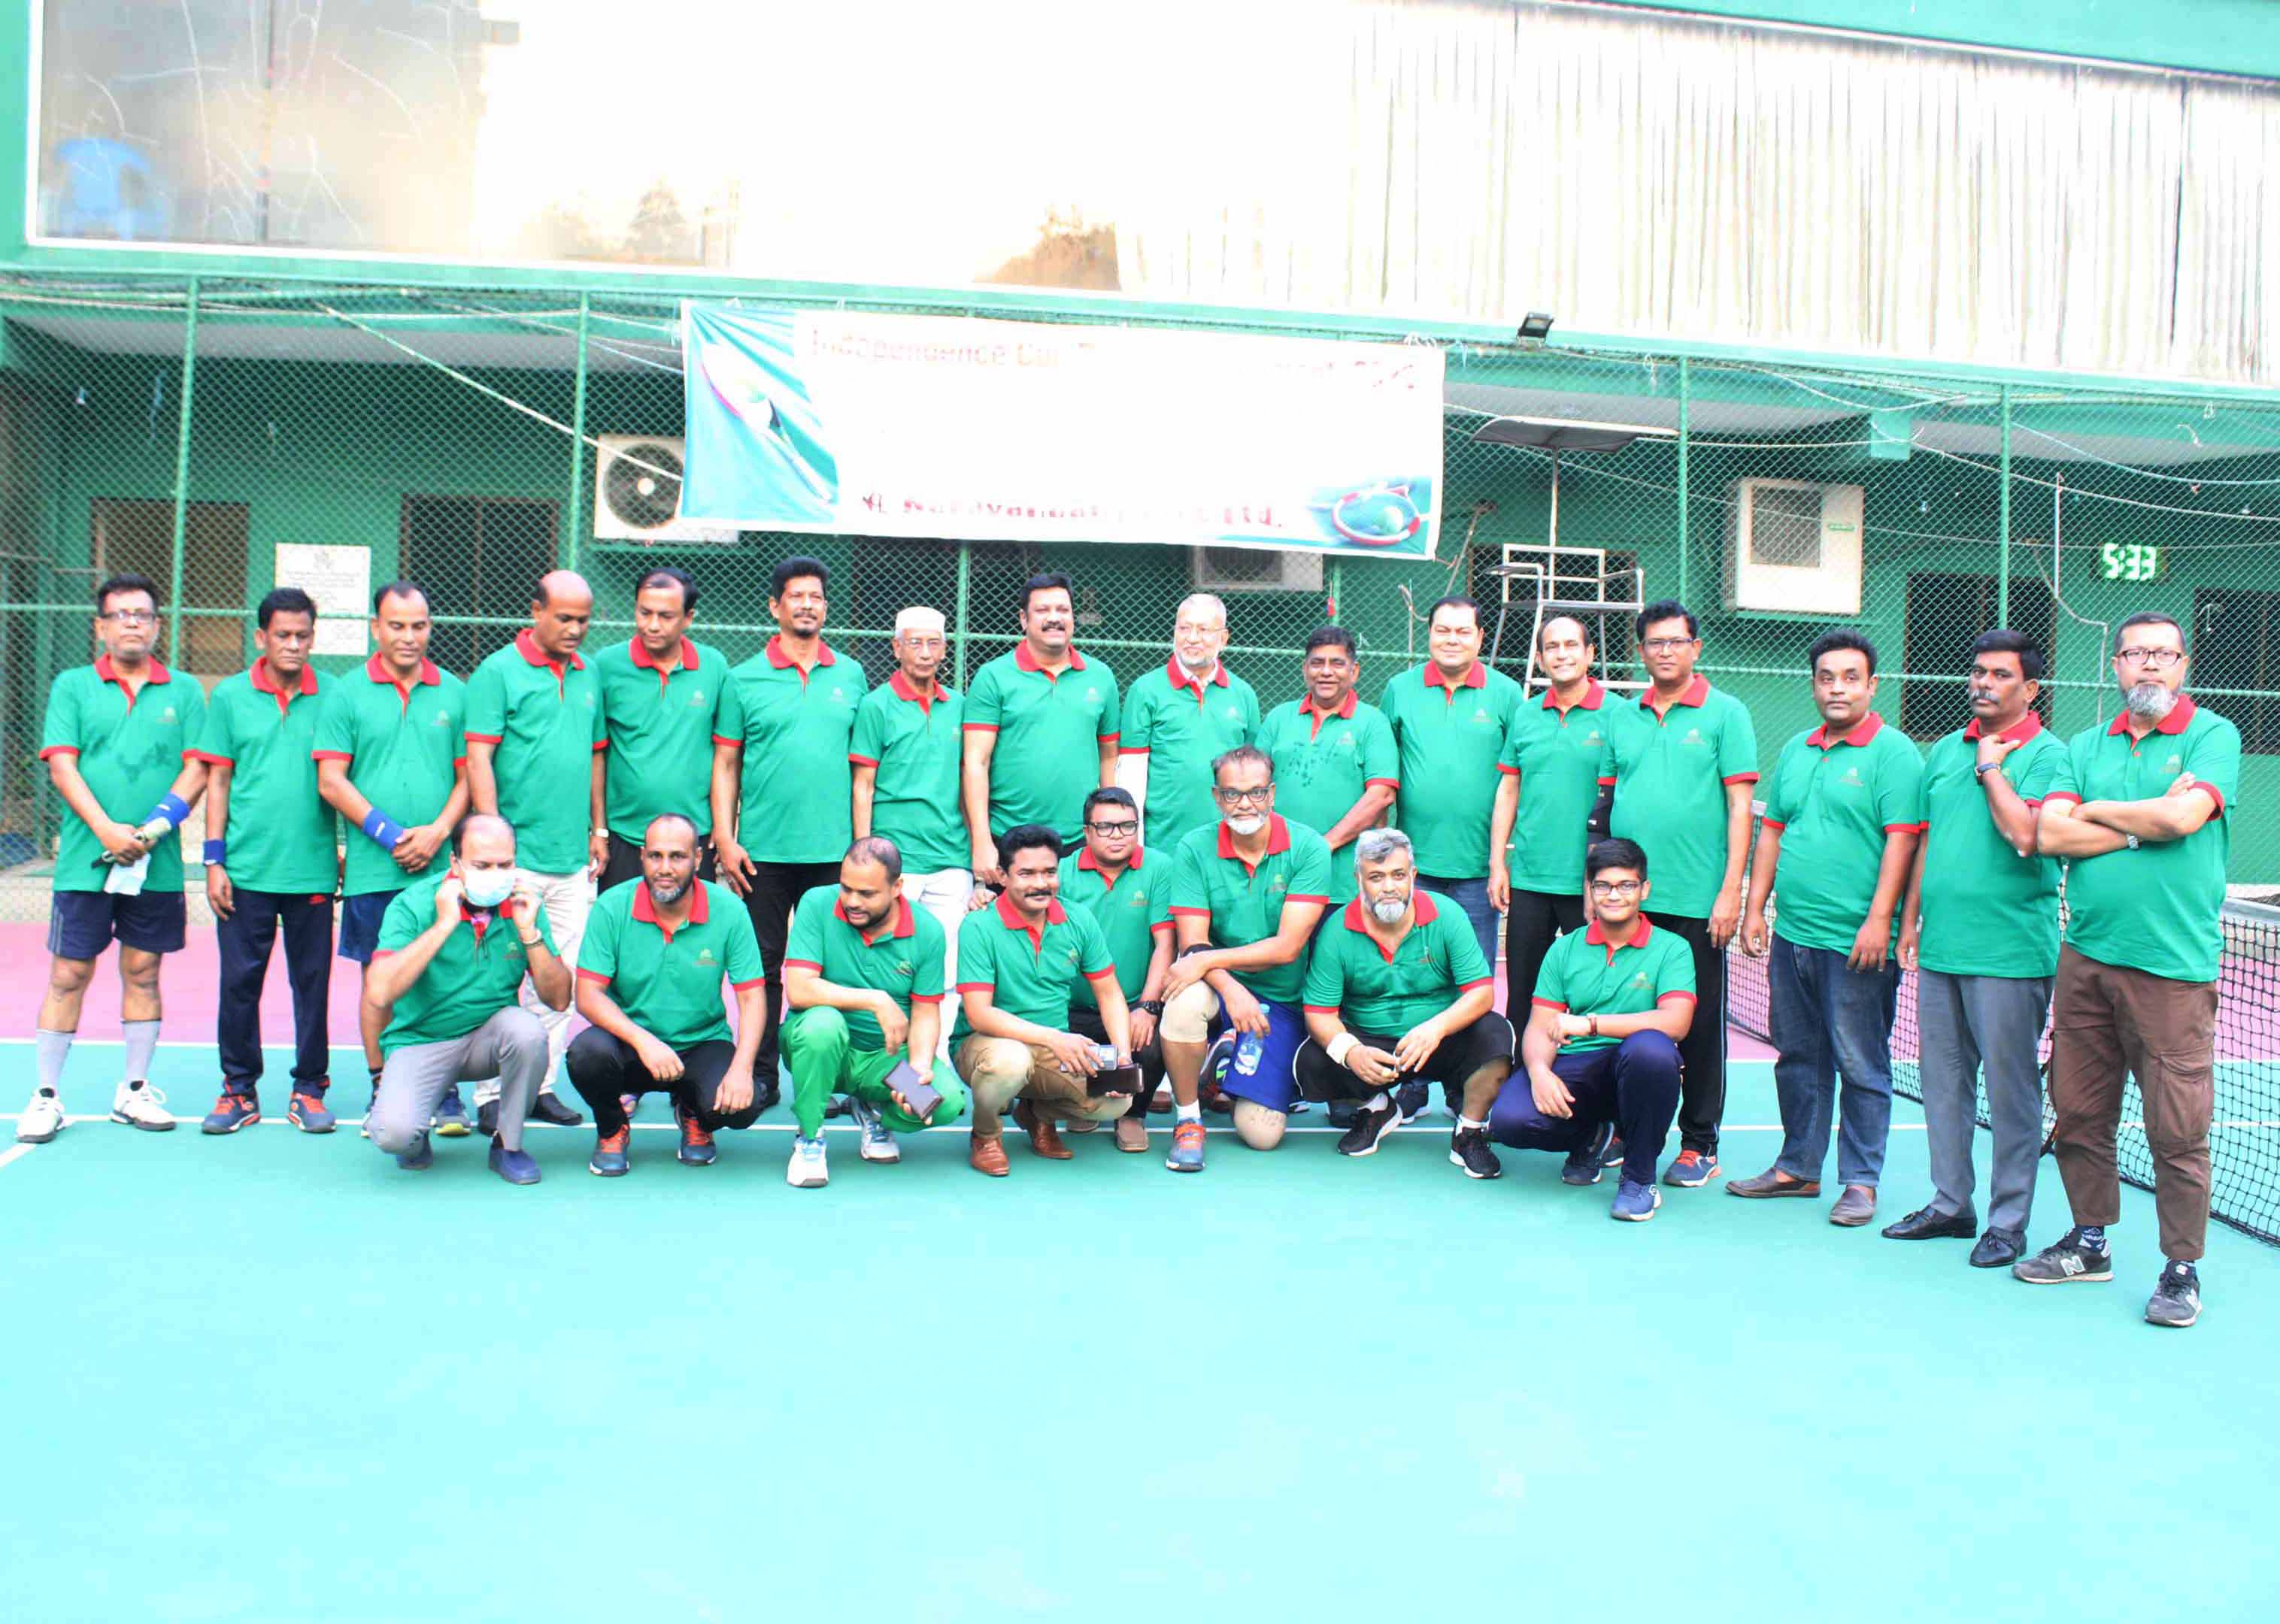  Independence Cup Tennis Tournament